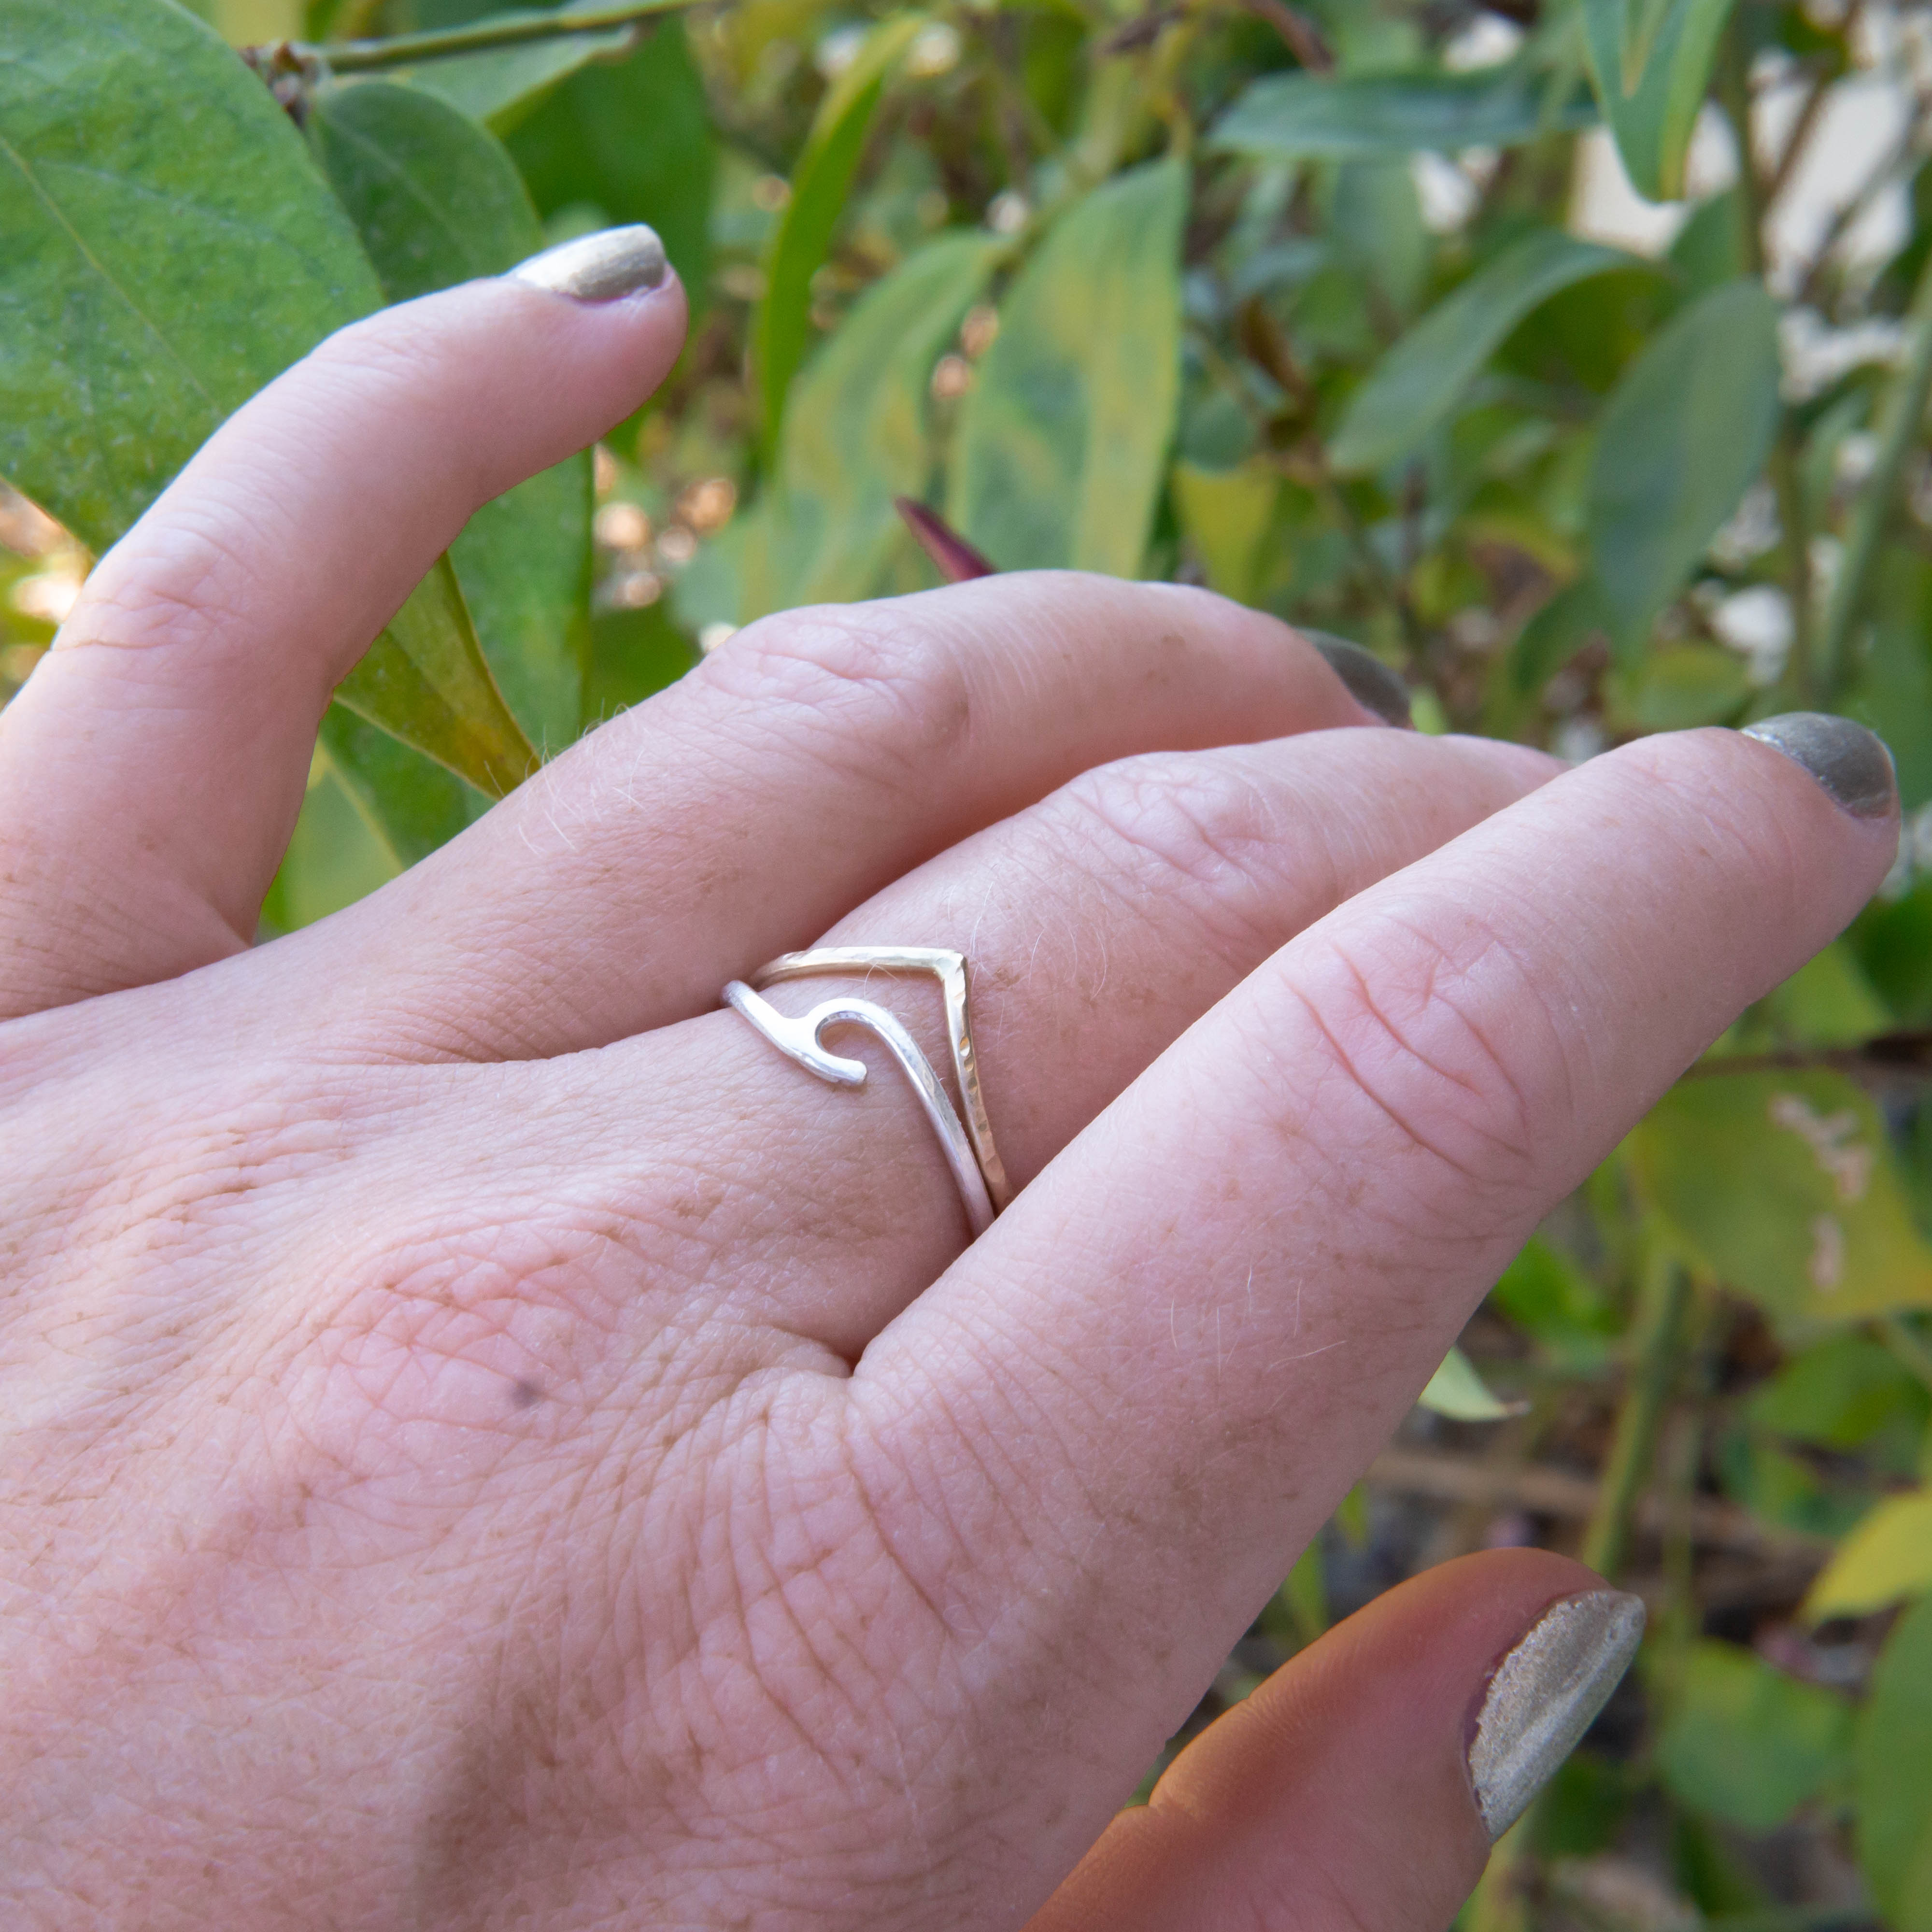 Wave Stackable Ring